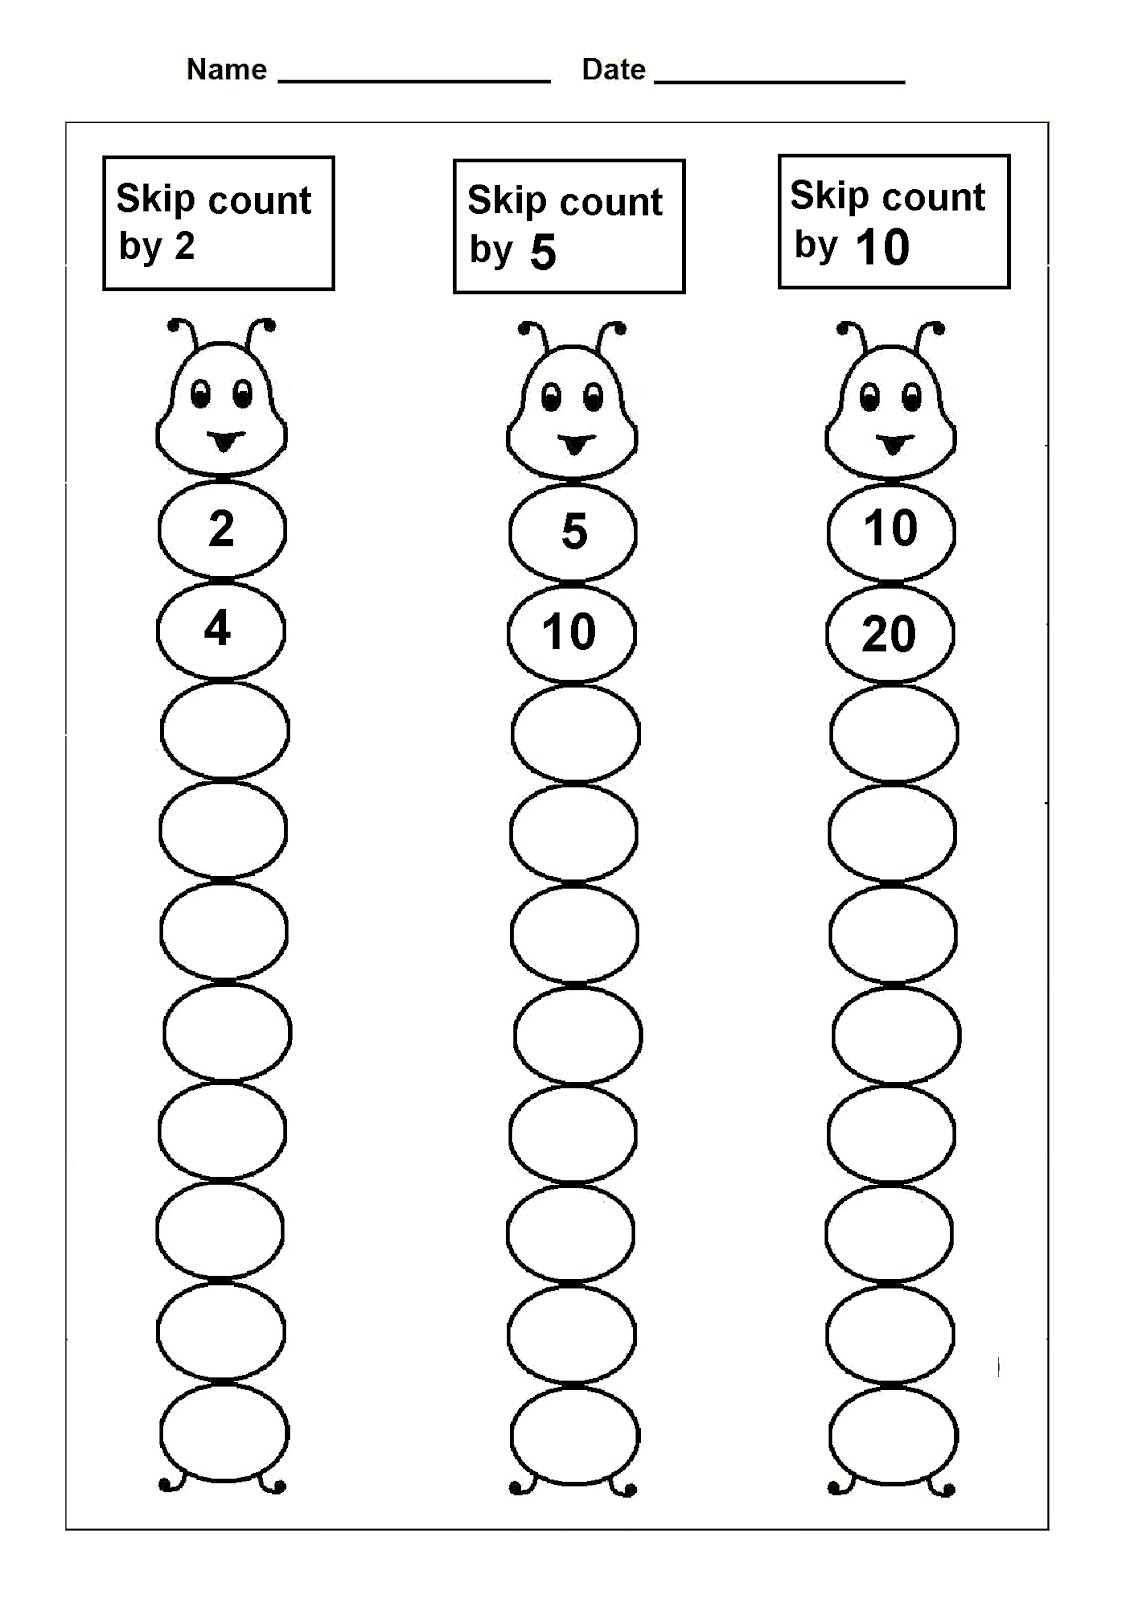 count by 2s worksheet for practice